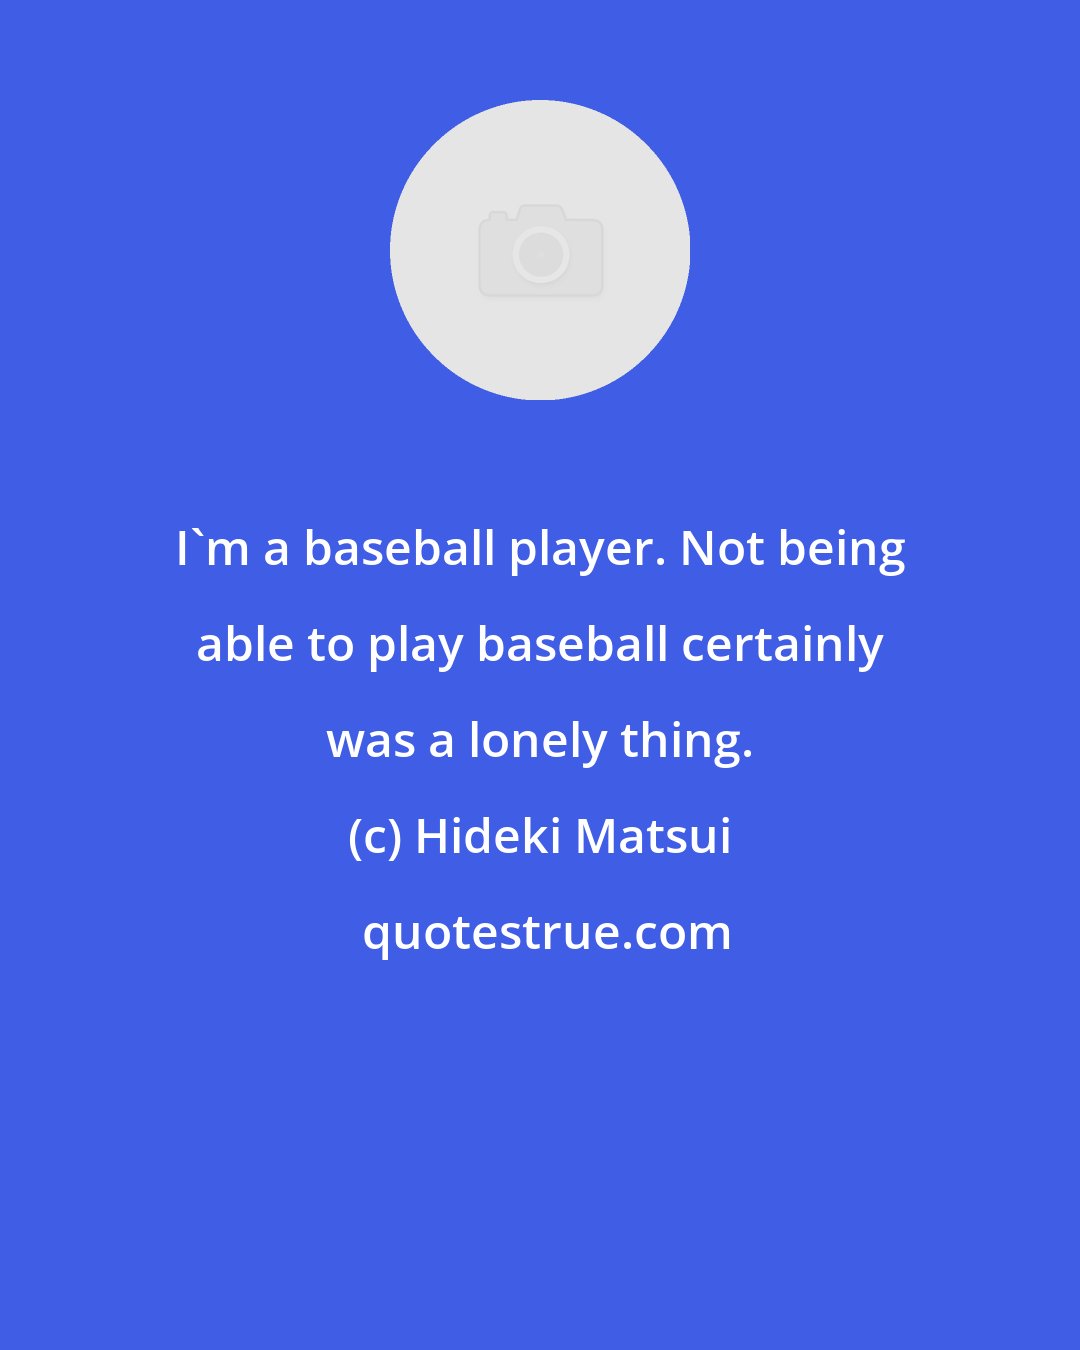 Hideki Matsui: I'm a baseball player. Not being able to play baseball certainly was a lonely thing.